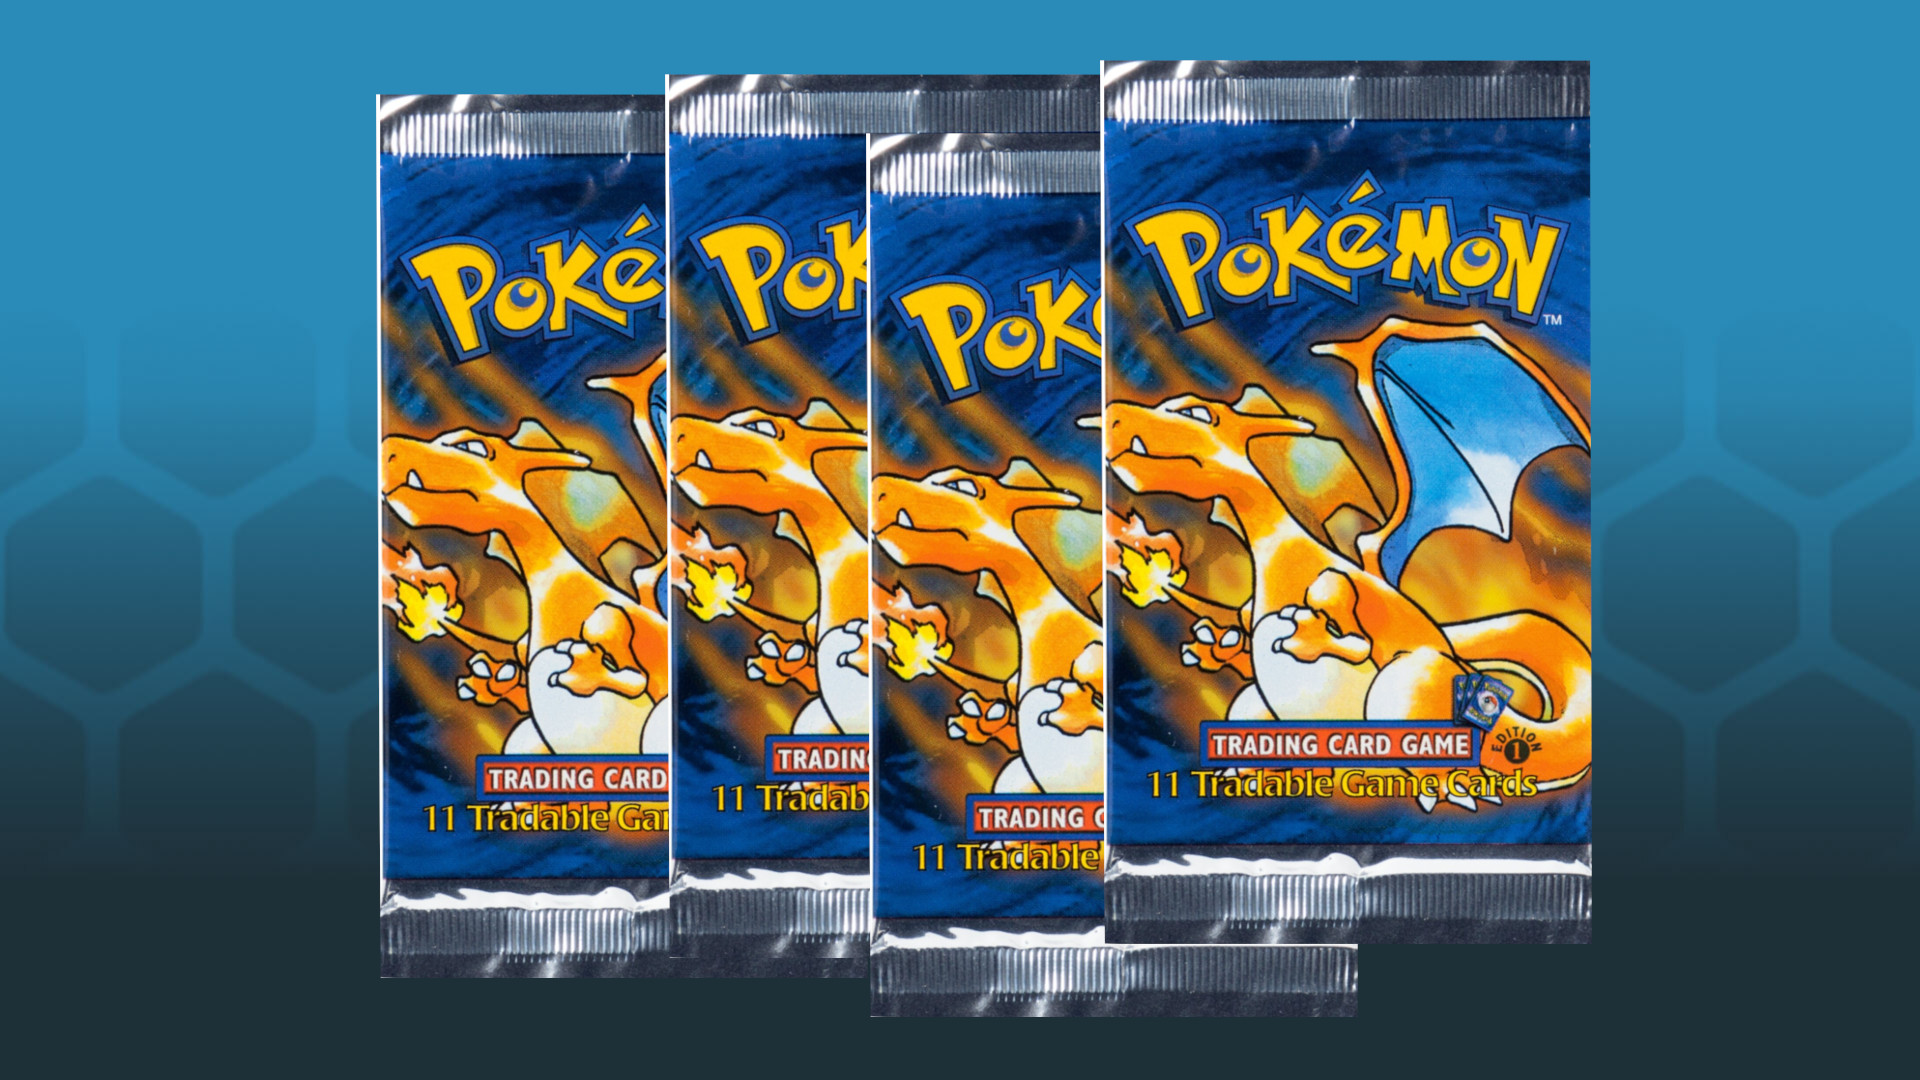 Ex-NFL player selling rare 1st edition Pokémon card packs for $4000+